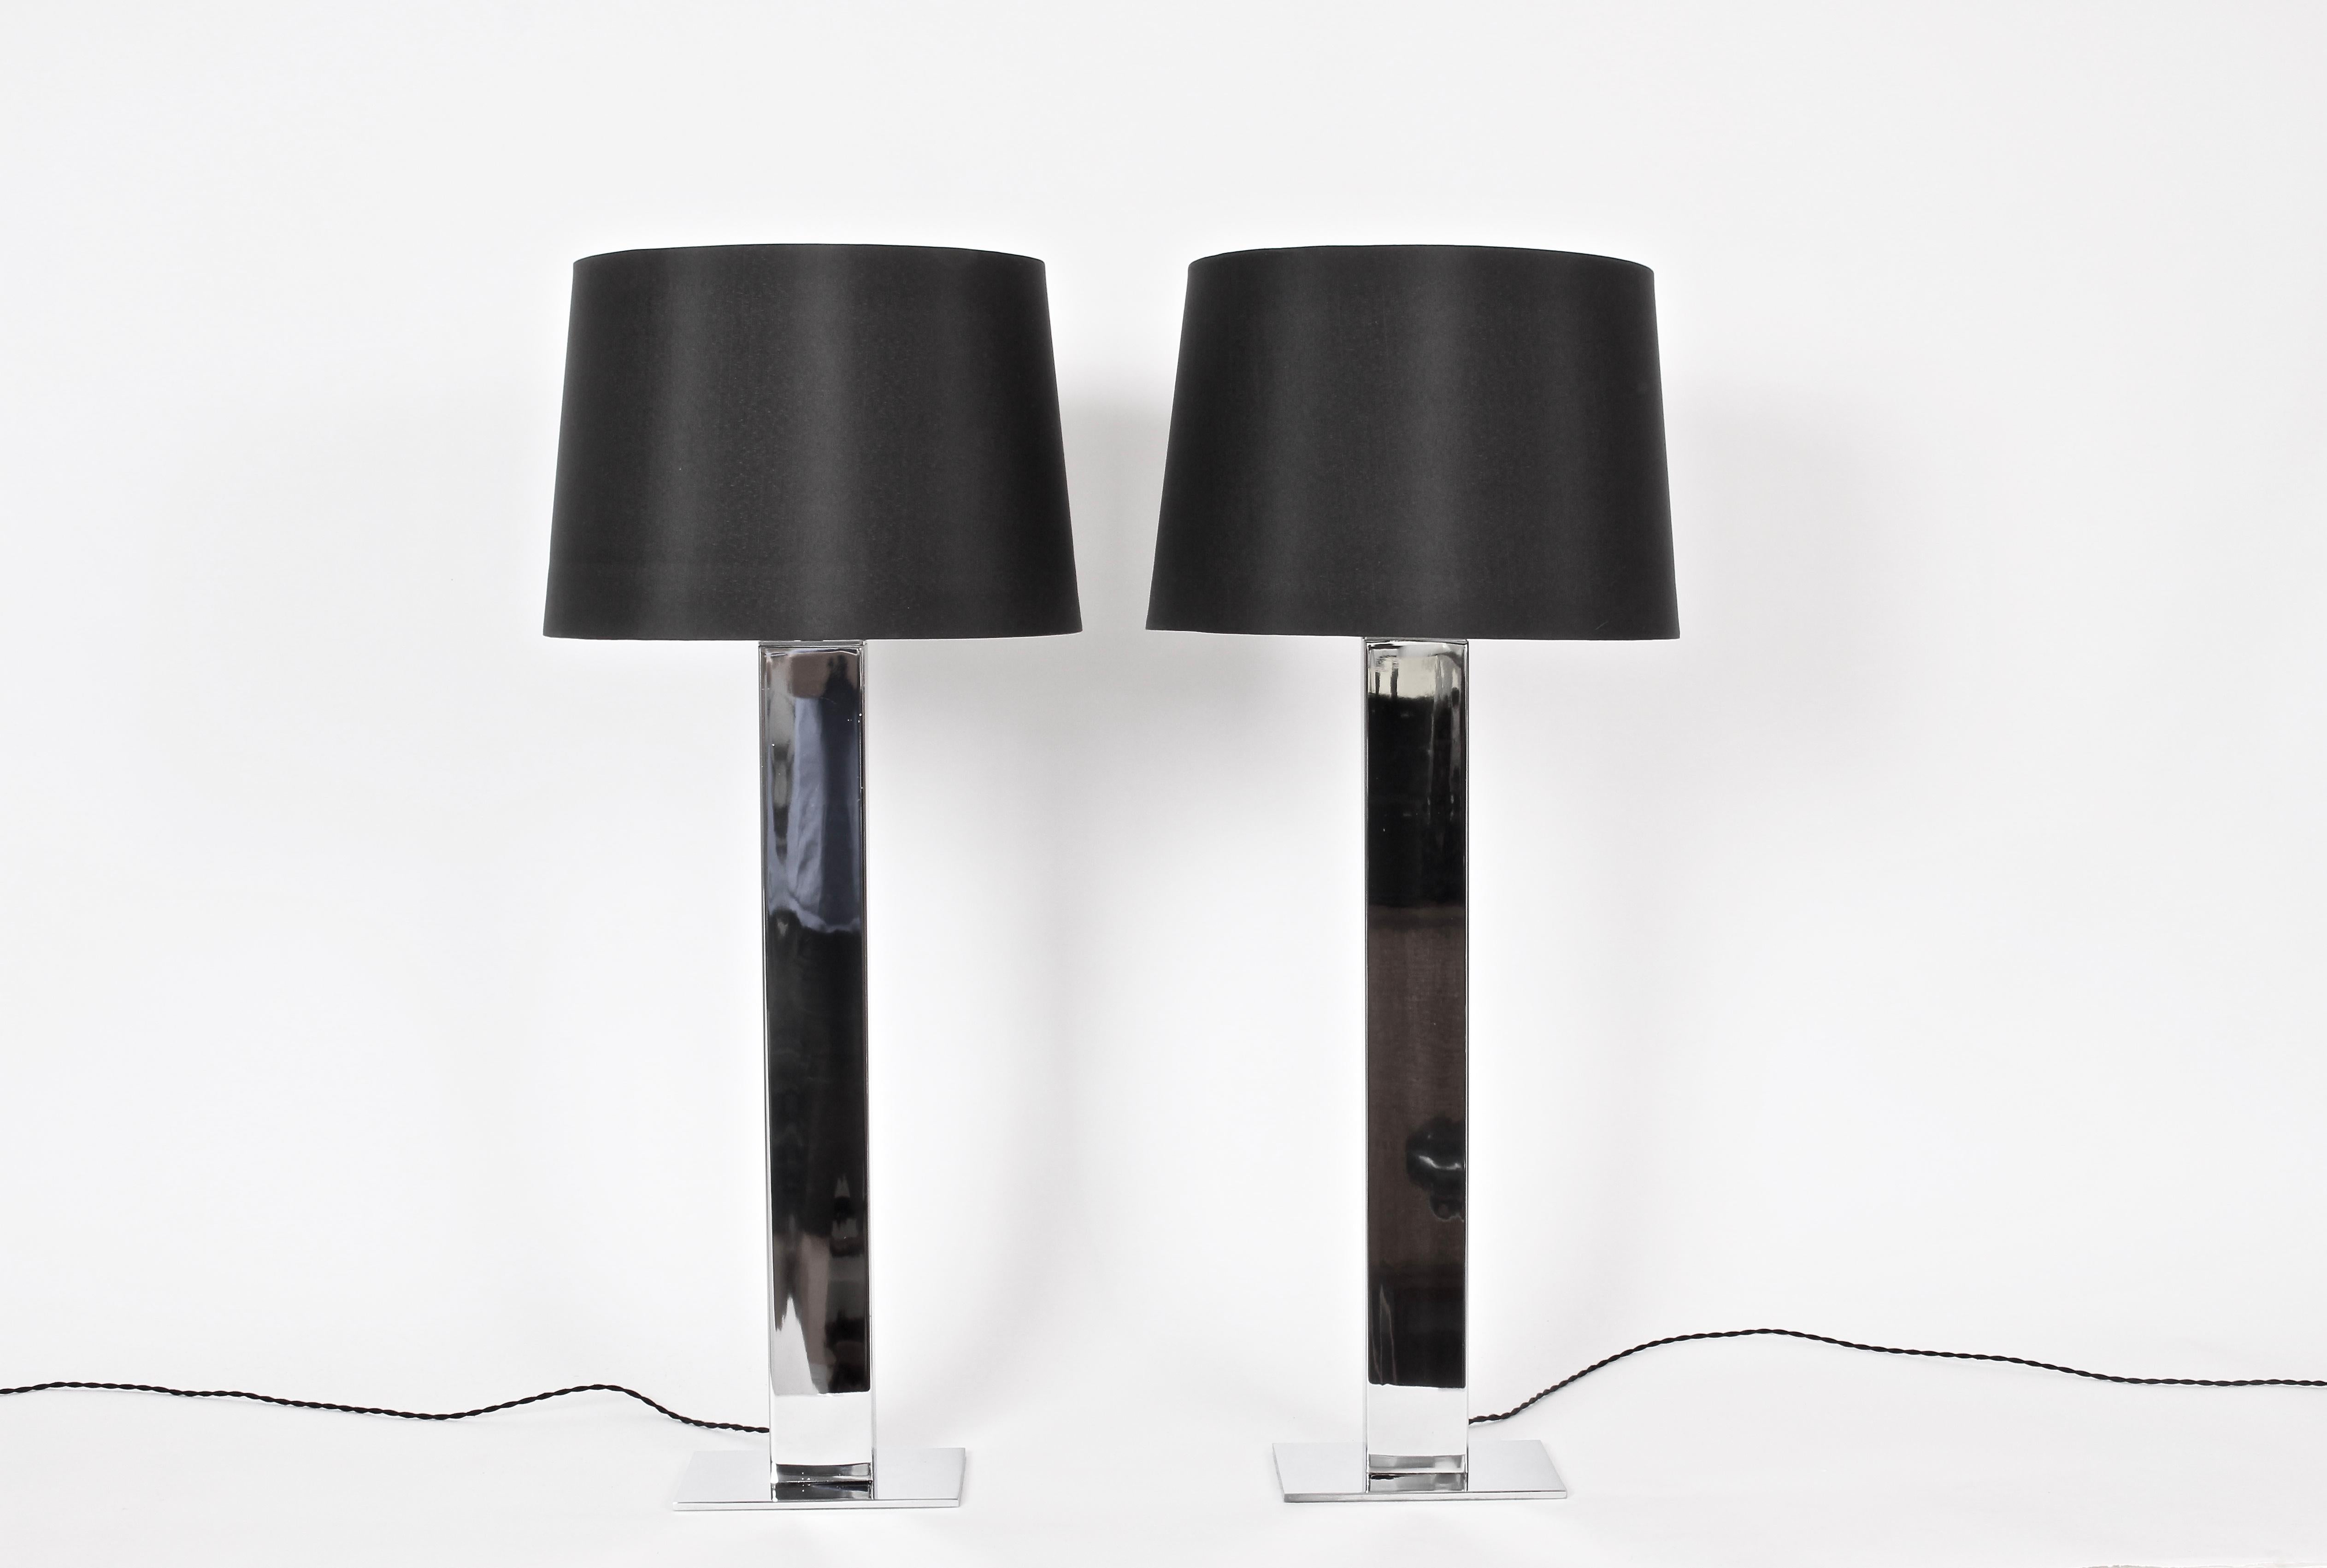 Substantial pair of reflective Chrome Plated Steel George Kovacs Table Lamps.  Featuring a slim, three foot, rectangular and heavy Chrome plated steel column on rectangular base. Small footprint. 28H to top of socket. Shades shown for display only